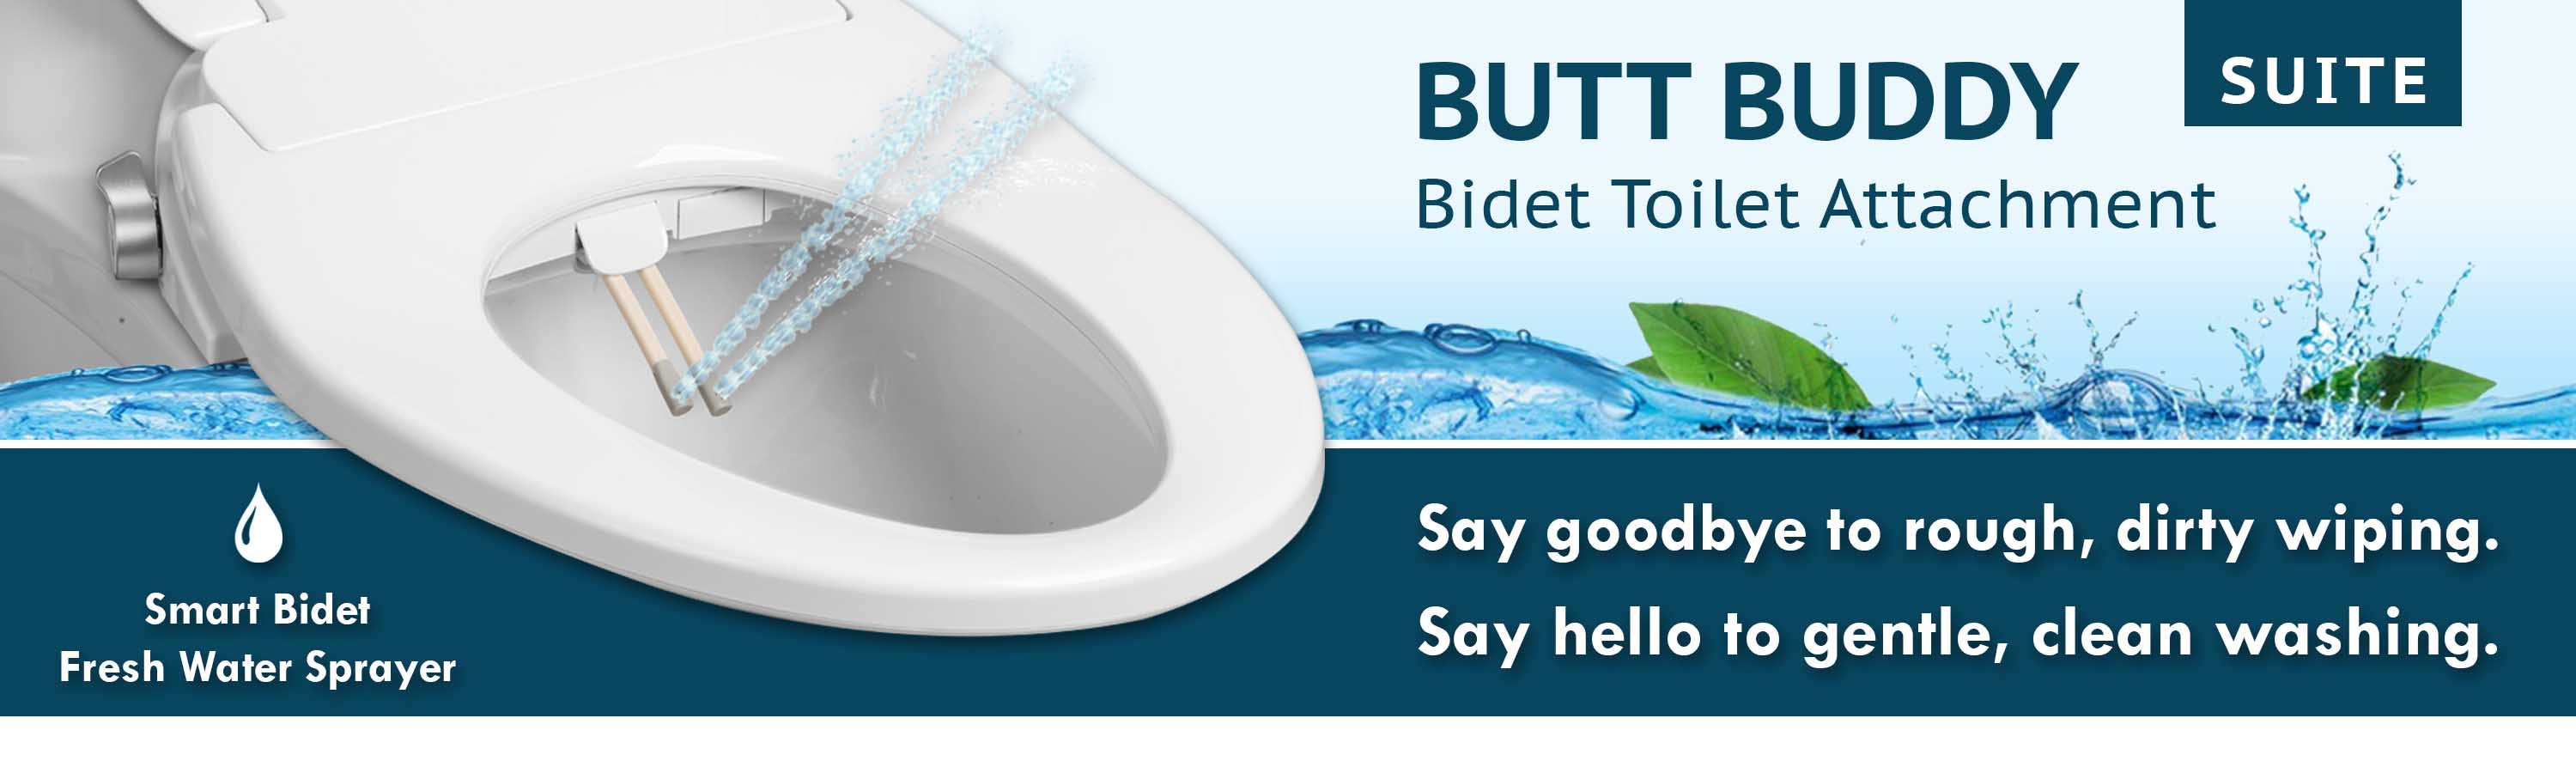 https://cdn.shopify.com/s/files/1/0077/2951/2505/files/1_-_In_My_Bathroom_-_IMB_-_Butt_Buddy_Suite_Bidet_-_Website_Listing_Banner_Image_-_BBB1S_-_Say_Goodbye_To_Wiping_Say_Hello_To_Washing_With_Water_Splash_Main_Banner.jpg?v=1643492600